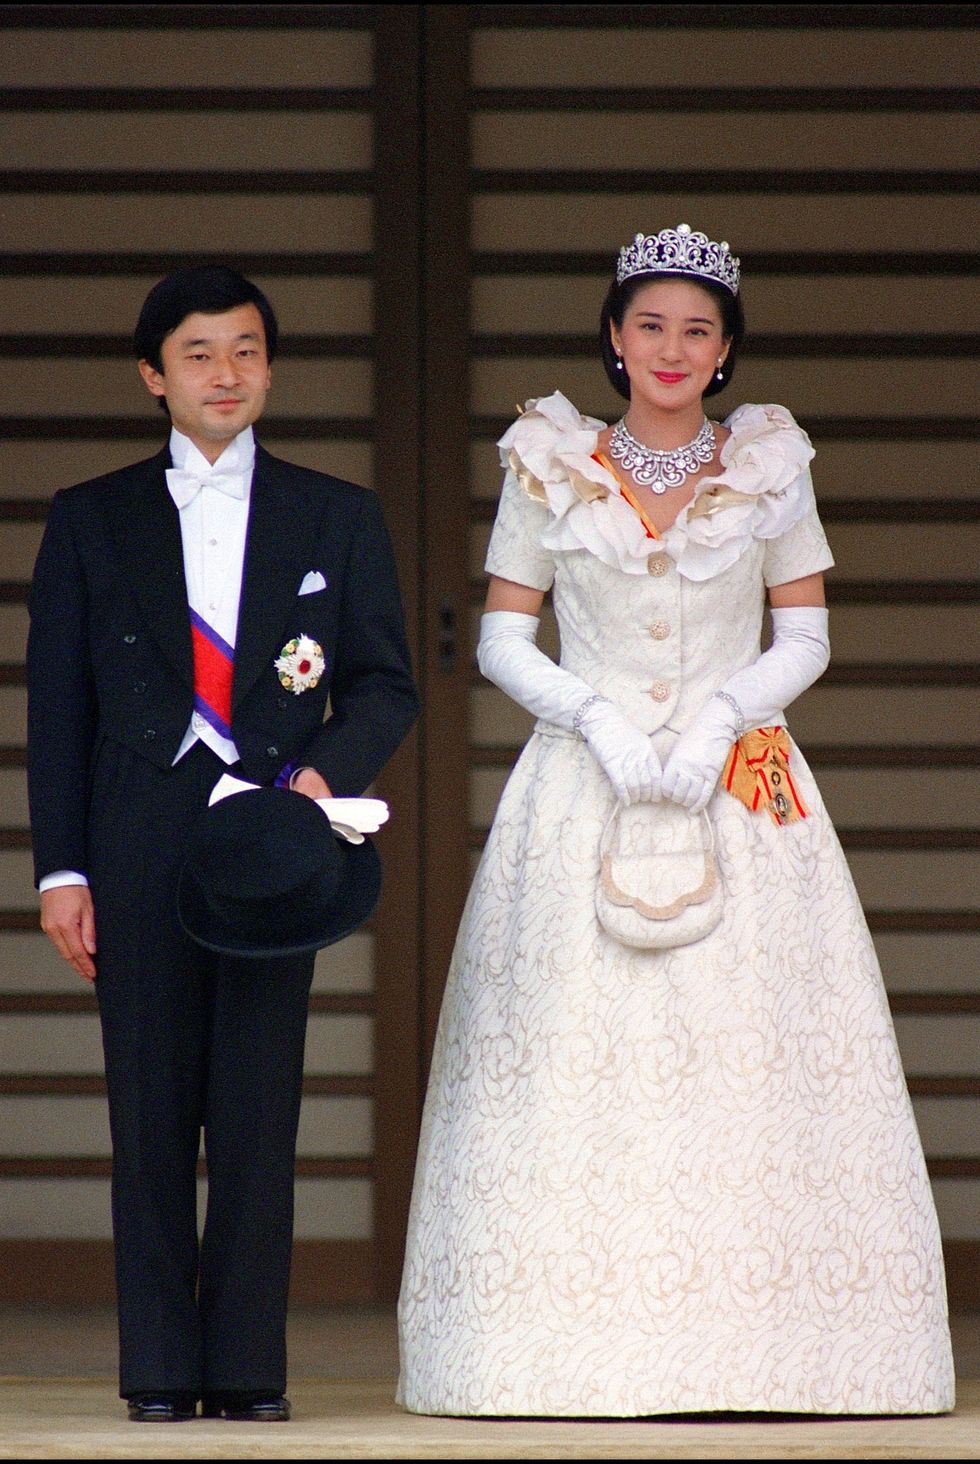 the newly wed crown prince naruhito and his wife